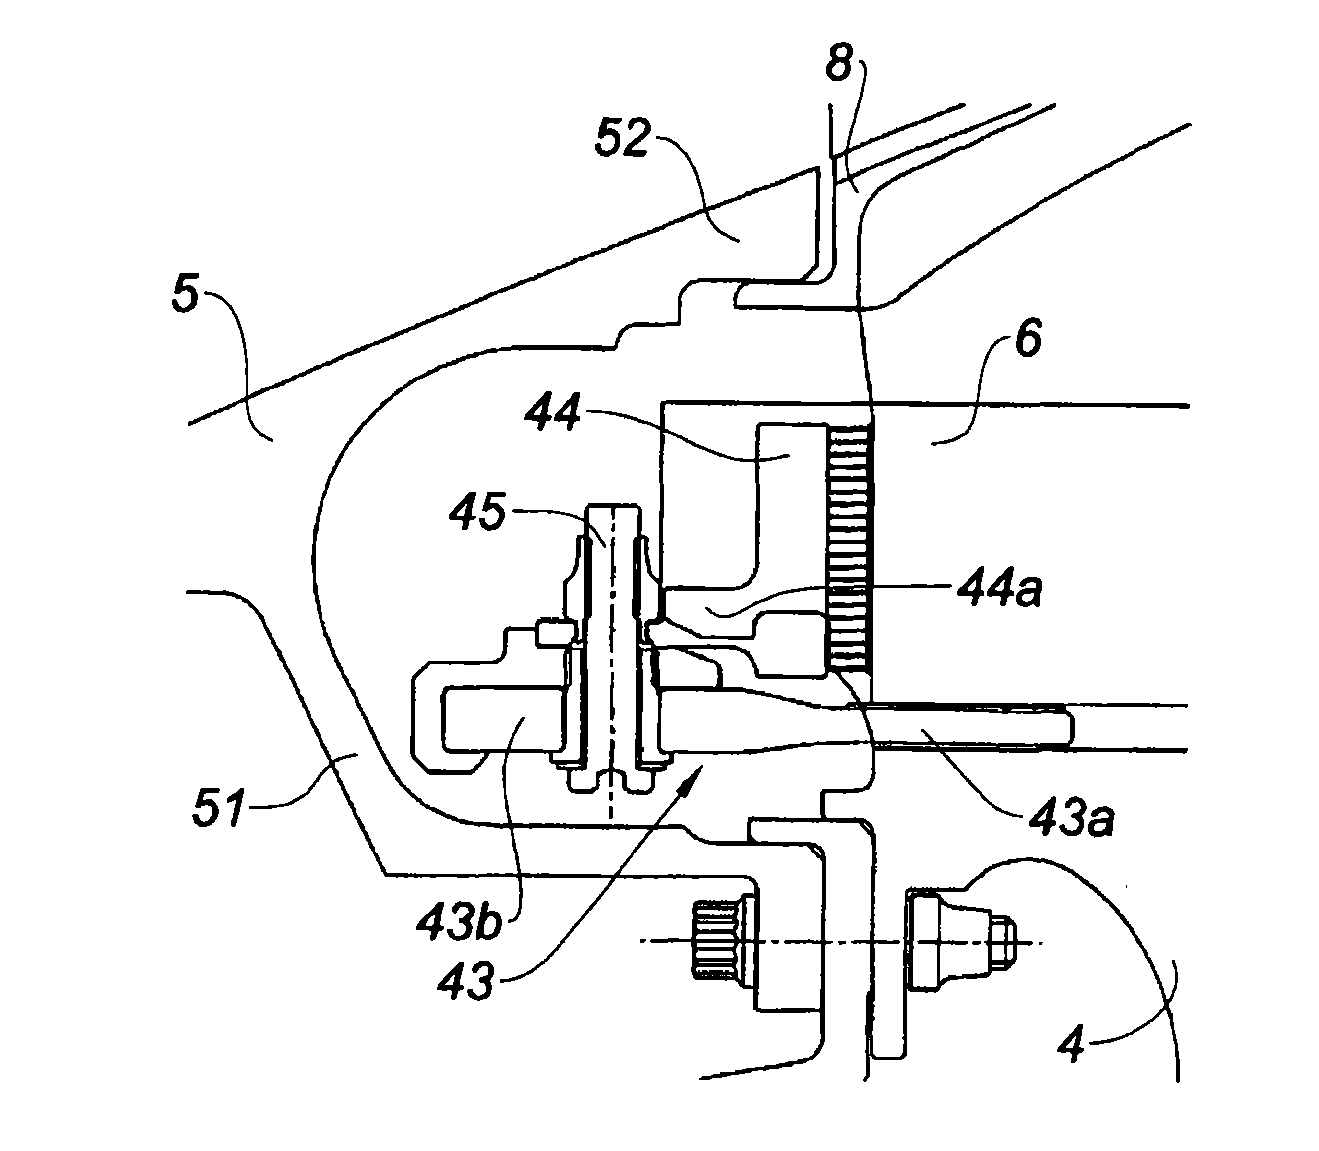 Turbomachine rotor with a means for axial retention of the blades